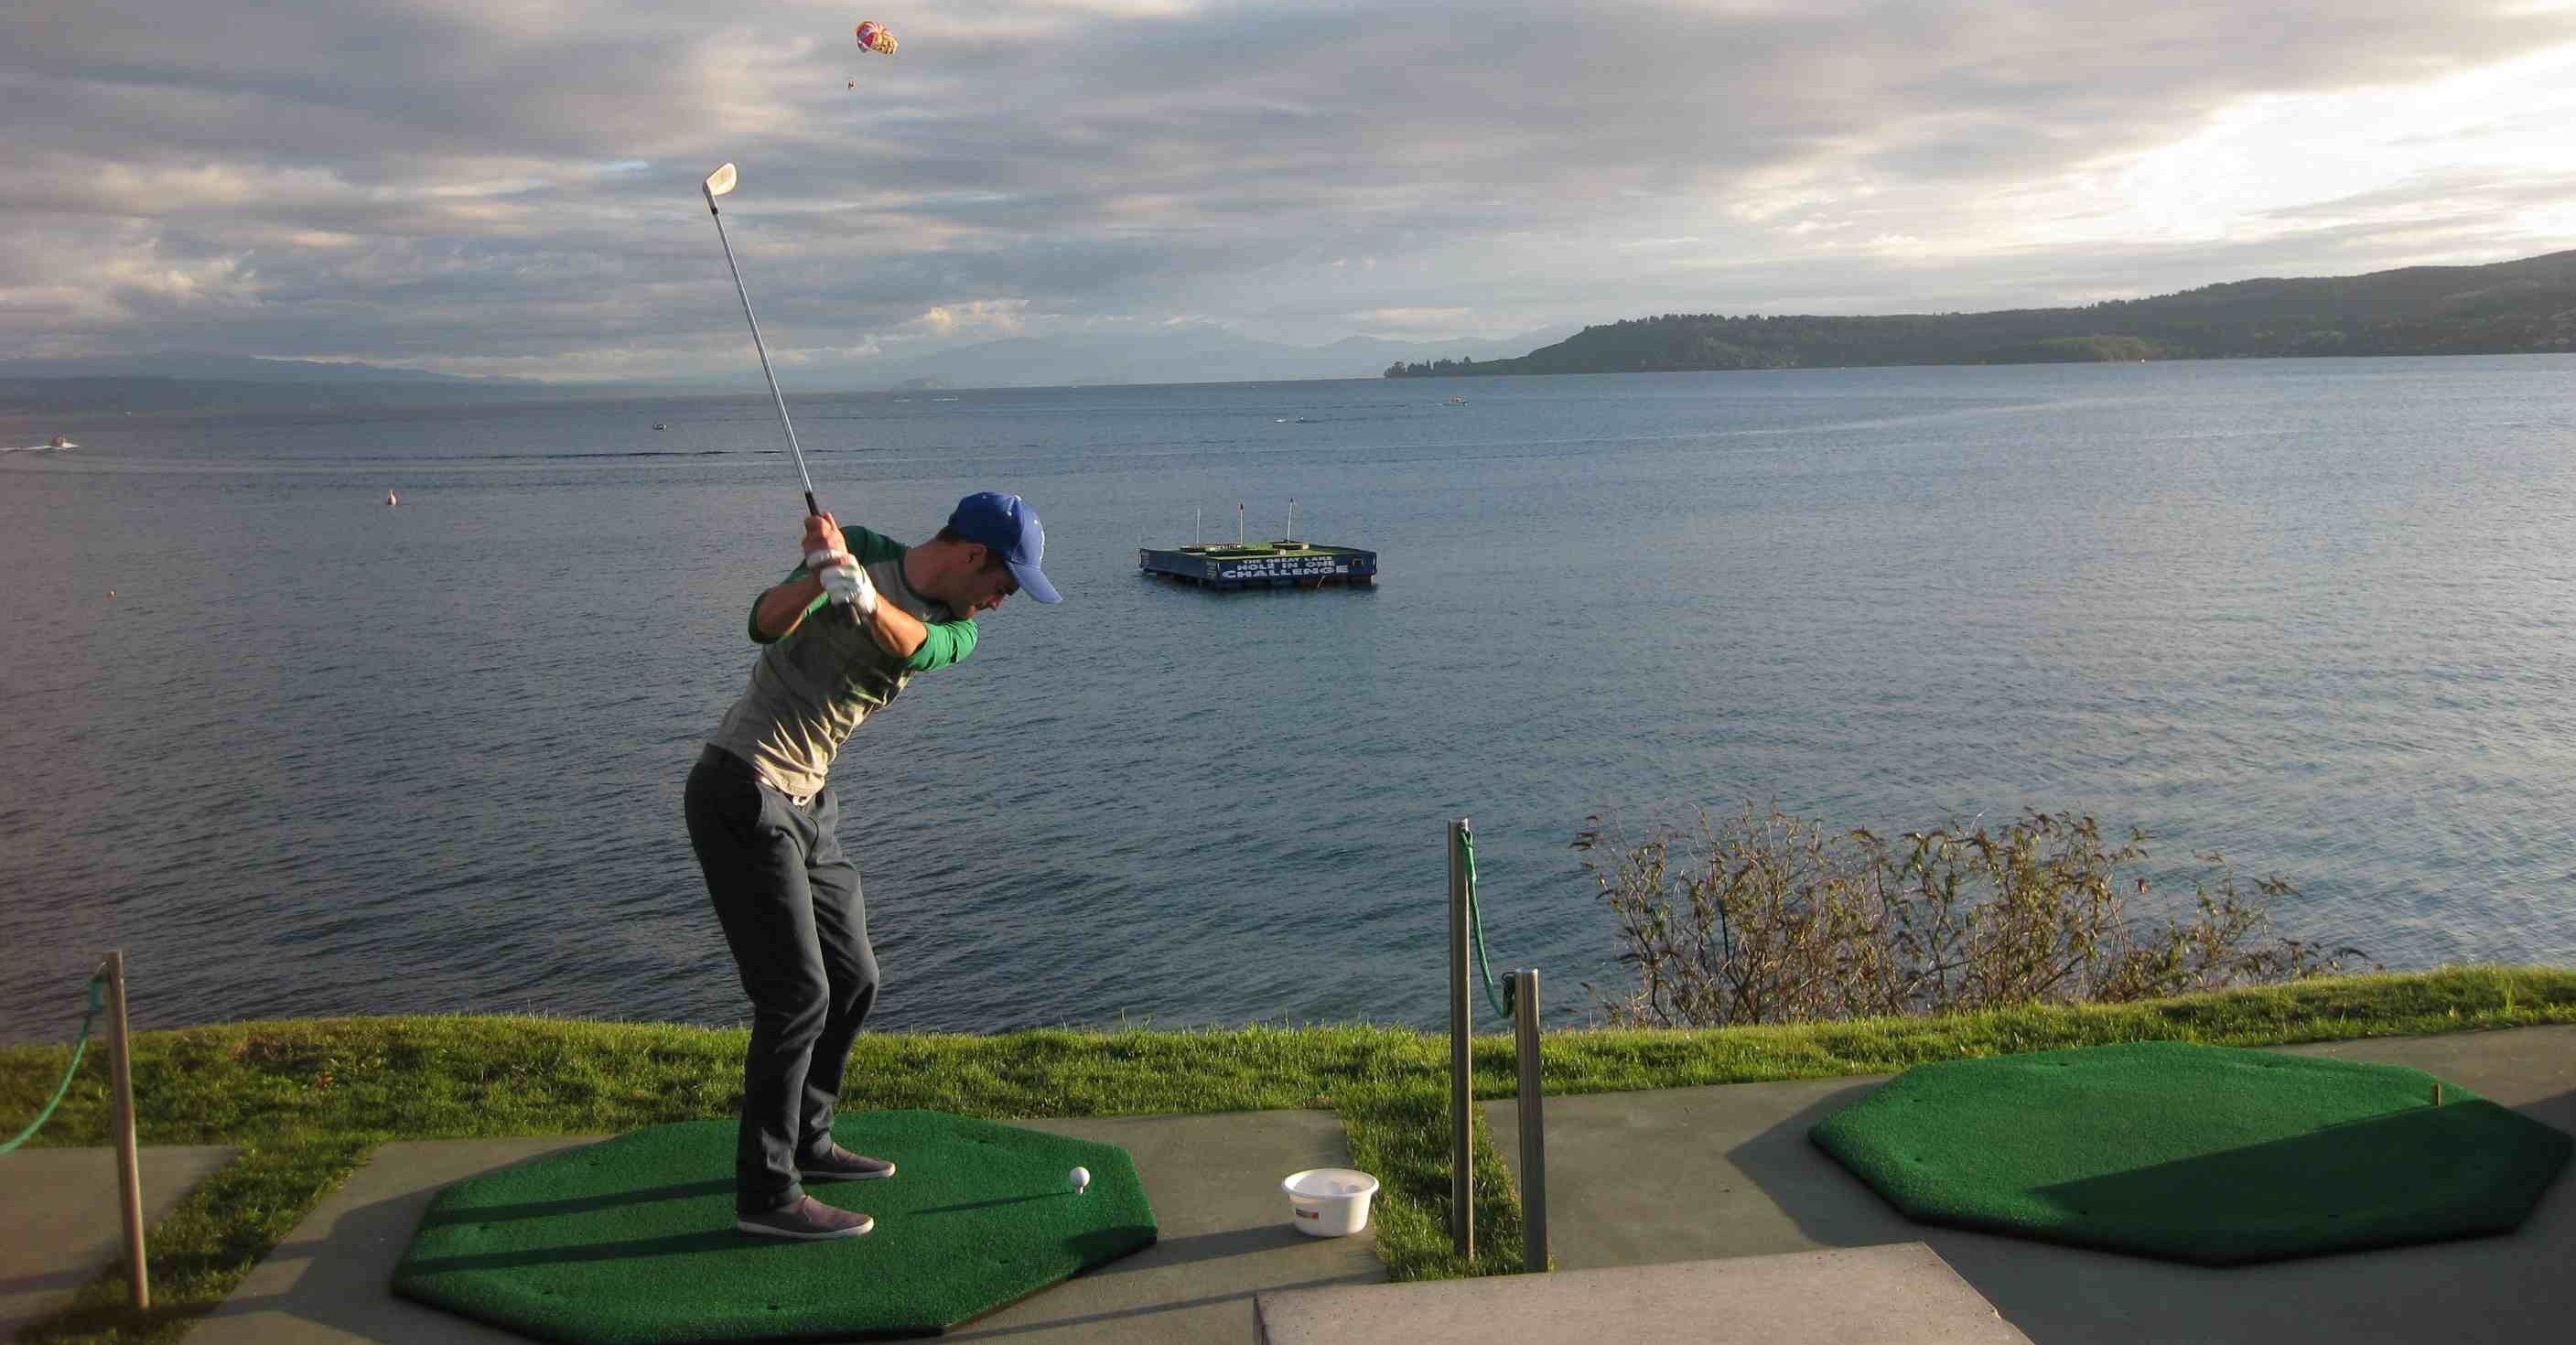 Golf player in Taupo, New Zealand